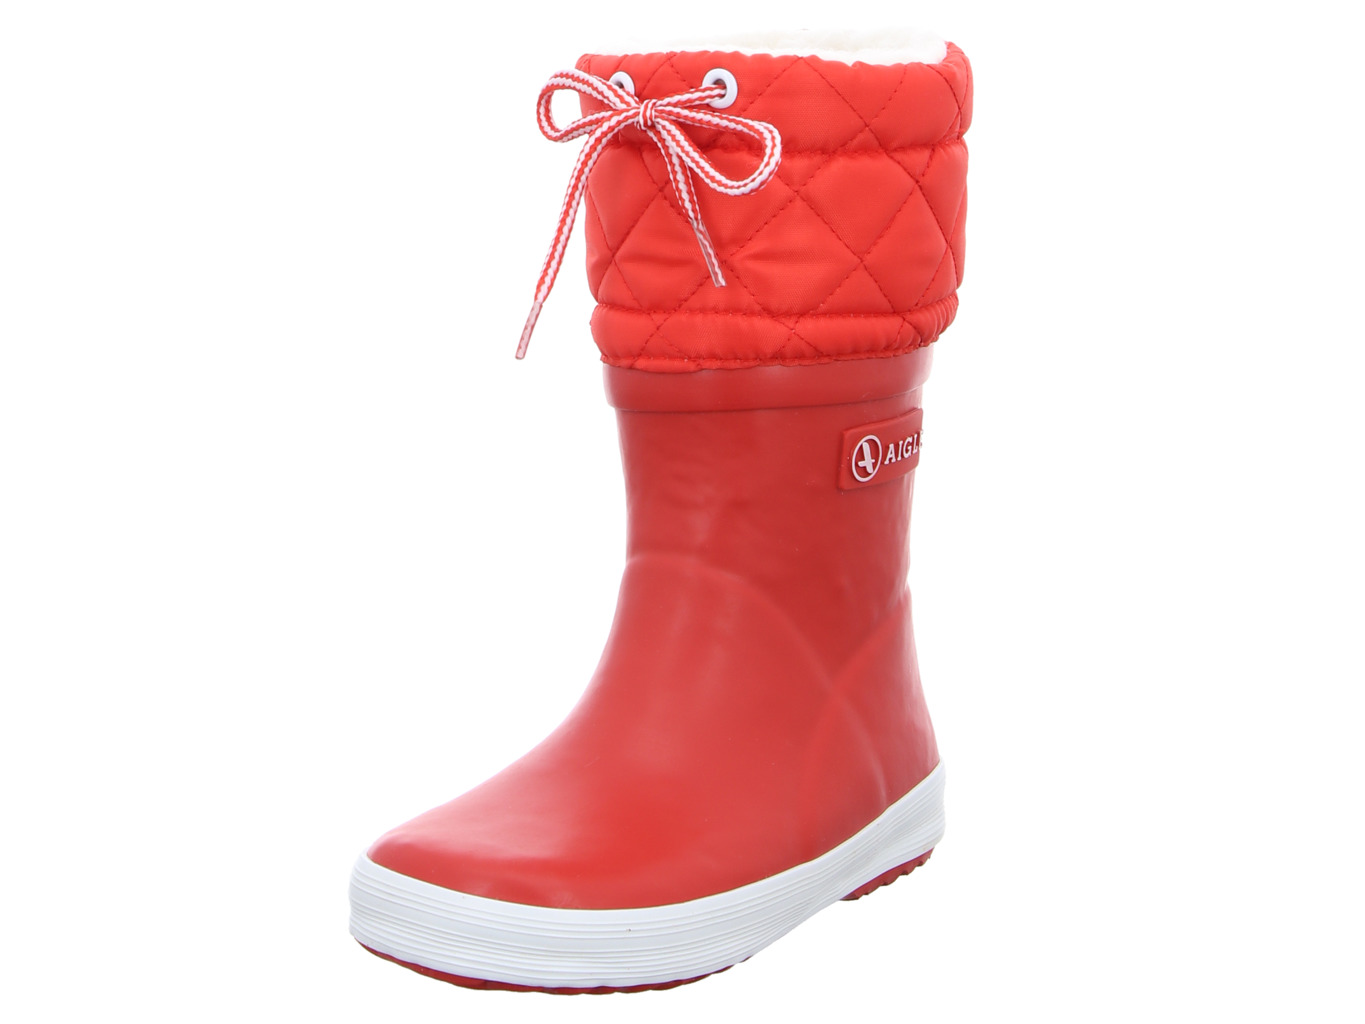 aigle_giboulee_rot_24538_rouge_1119